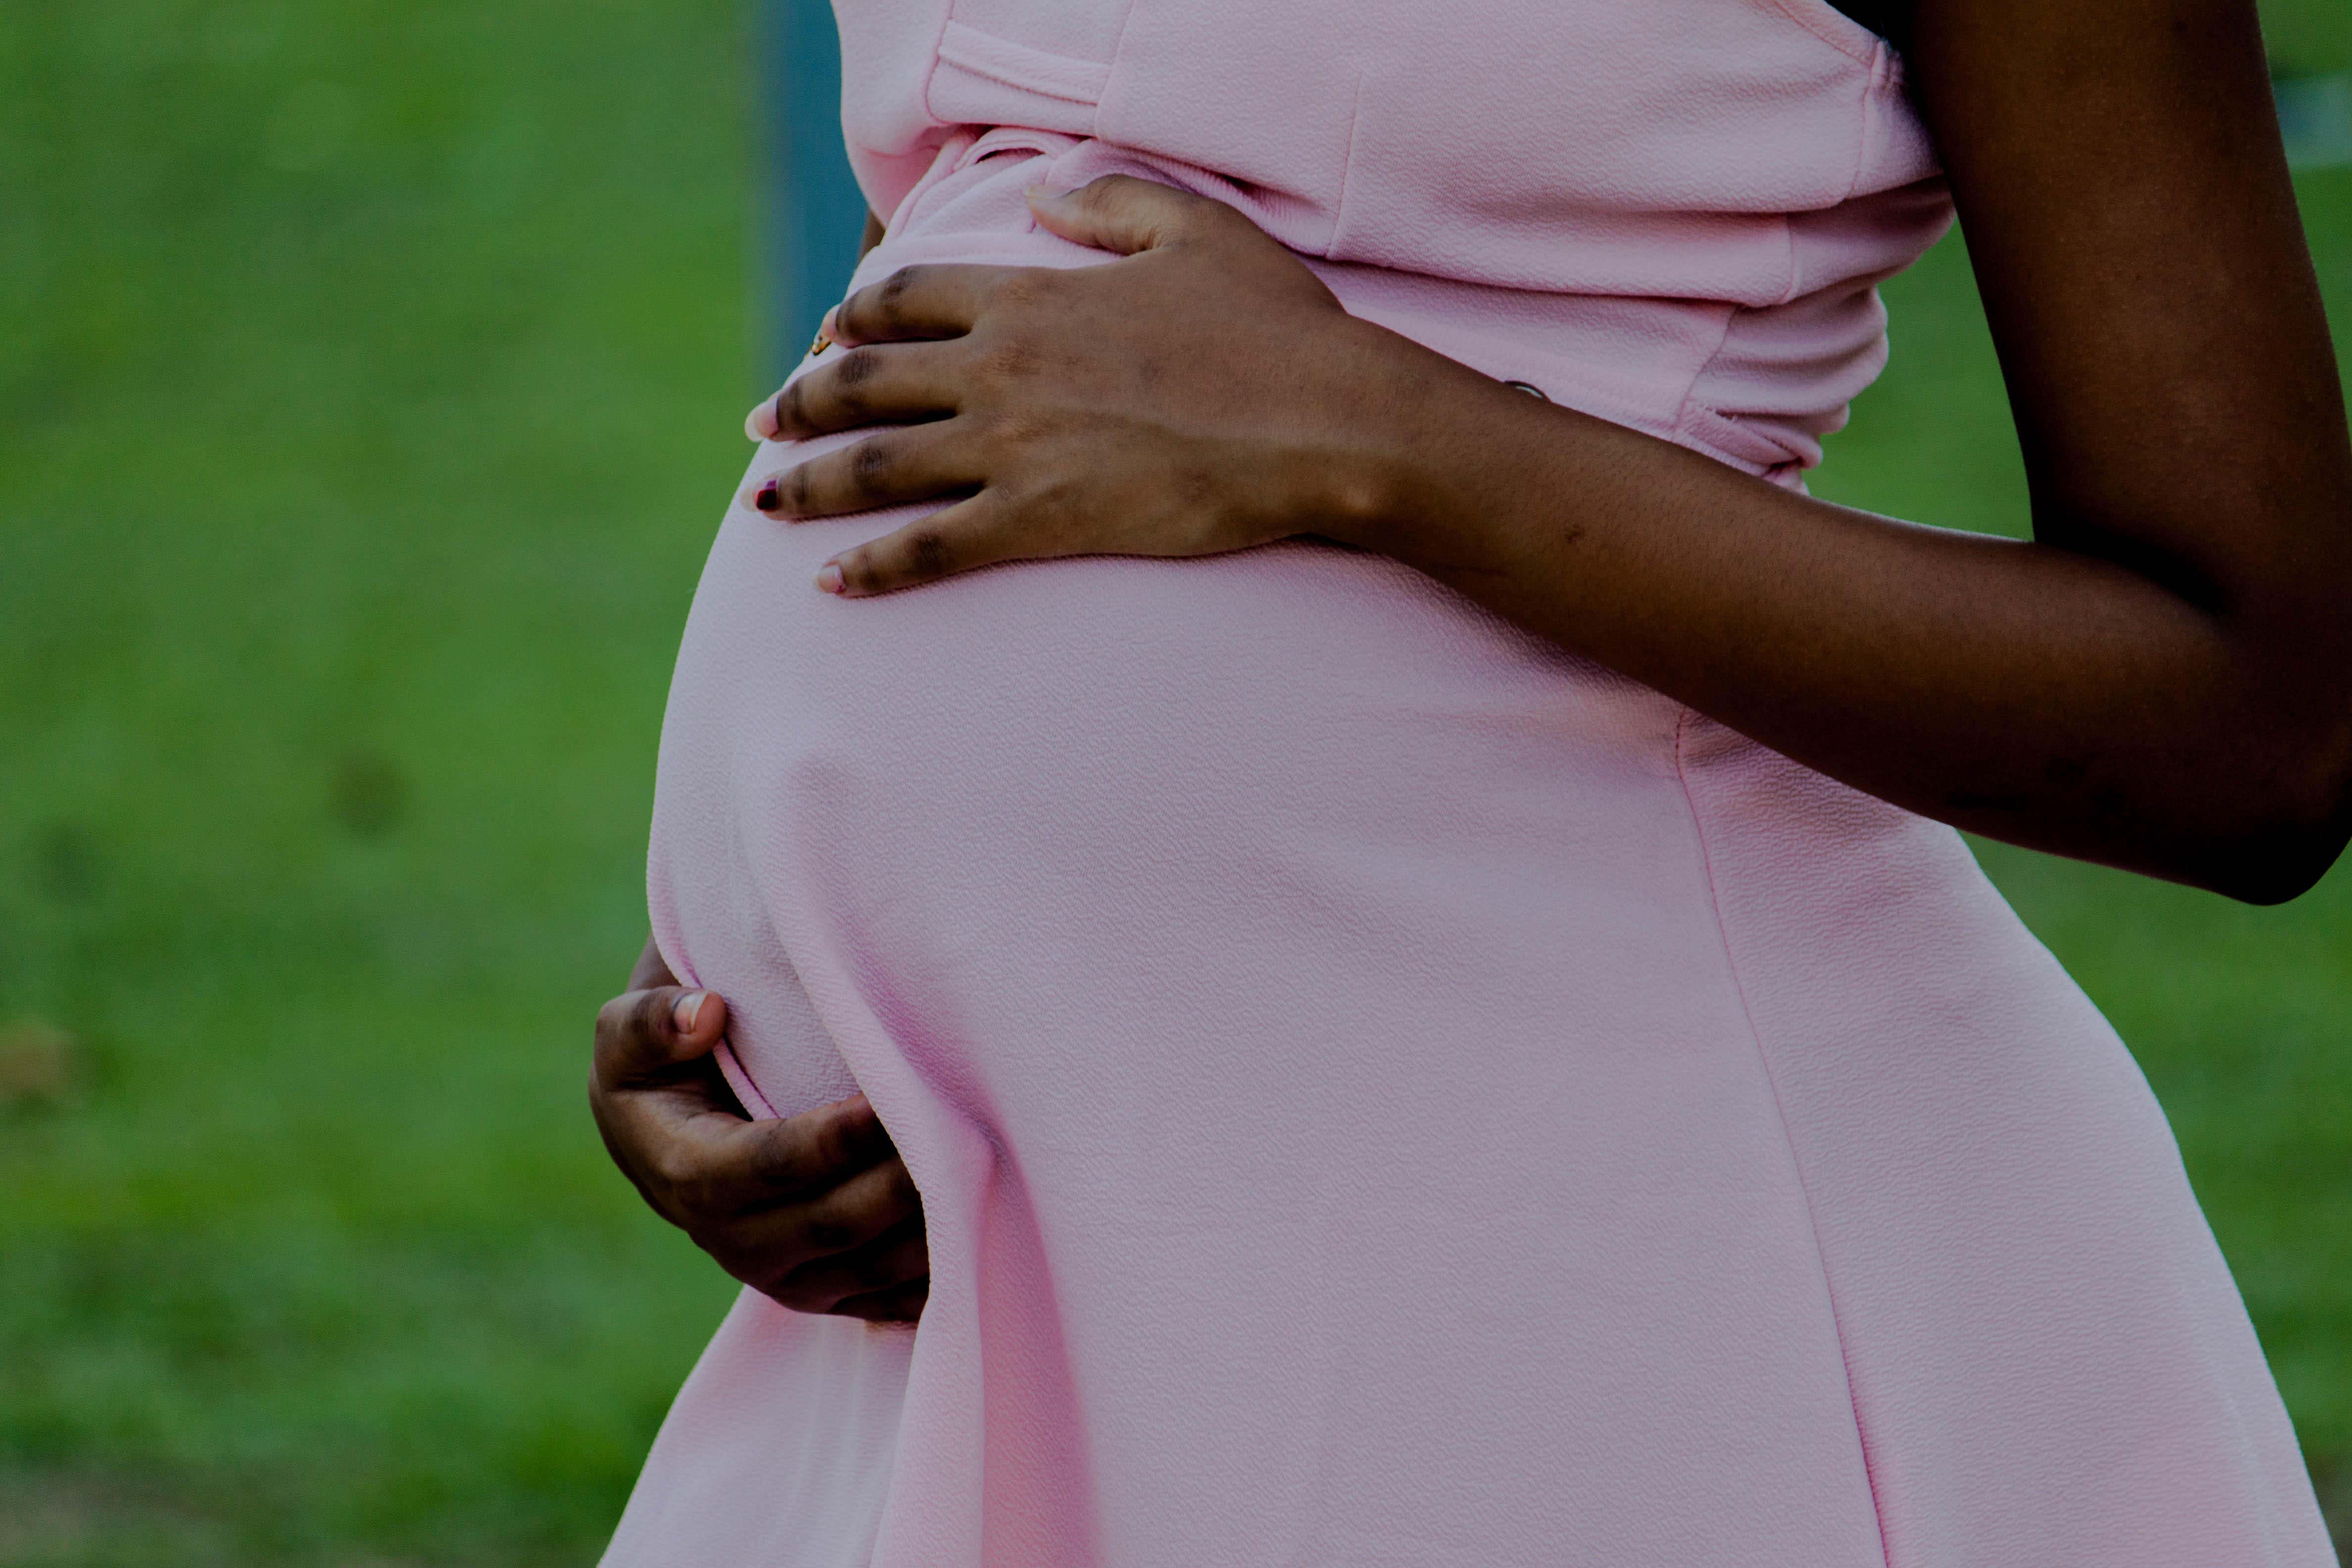 The UK’s first black maternal health conference is taking place in London to look at racism and bias that has created inequalities in maternity care (Alamy/PA)